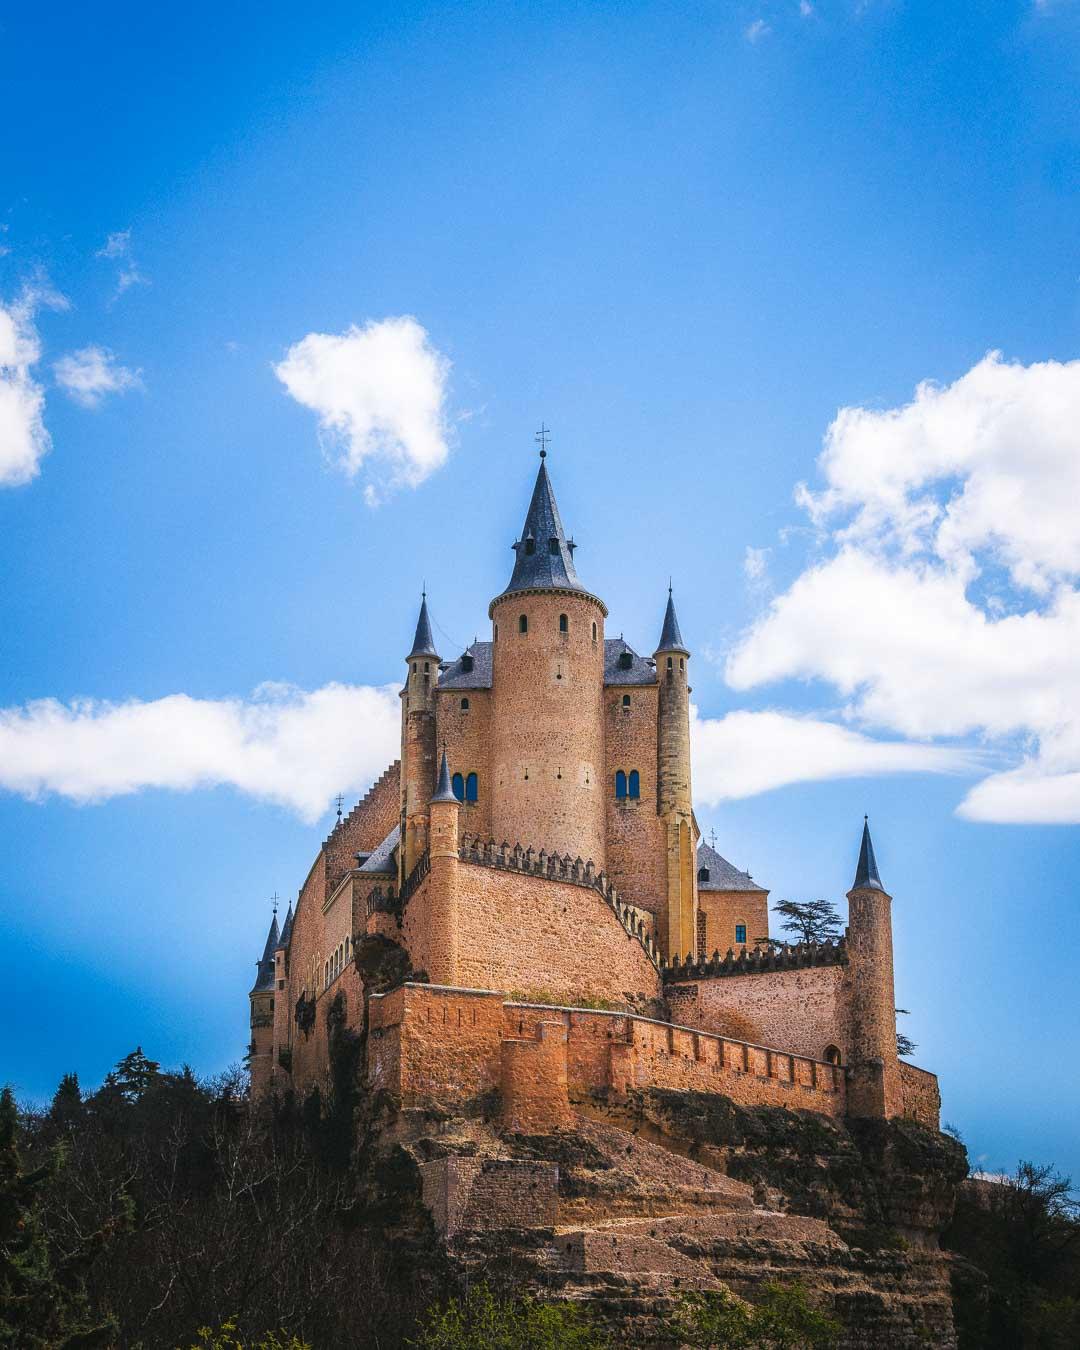 the segovia castle from the front during a segovia day trip from madrid